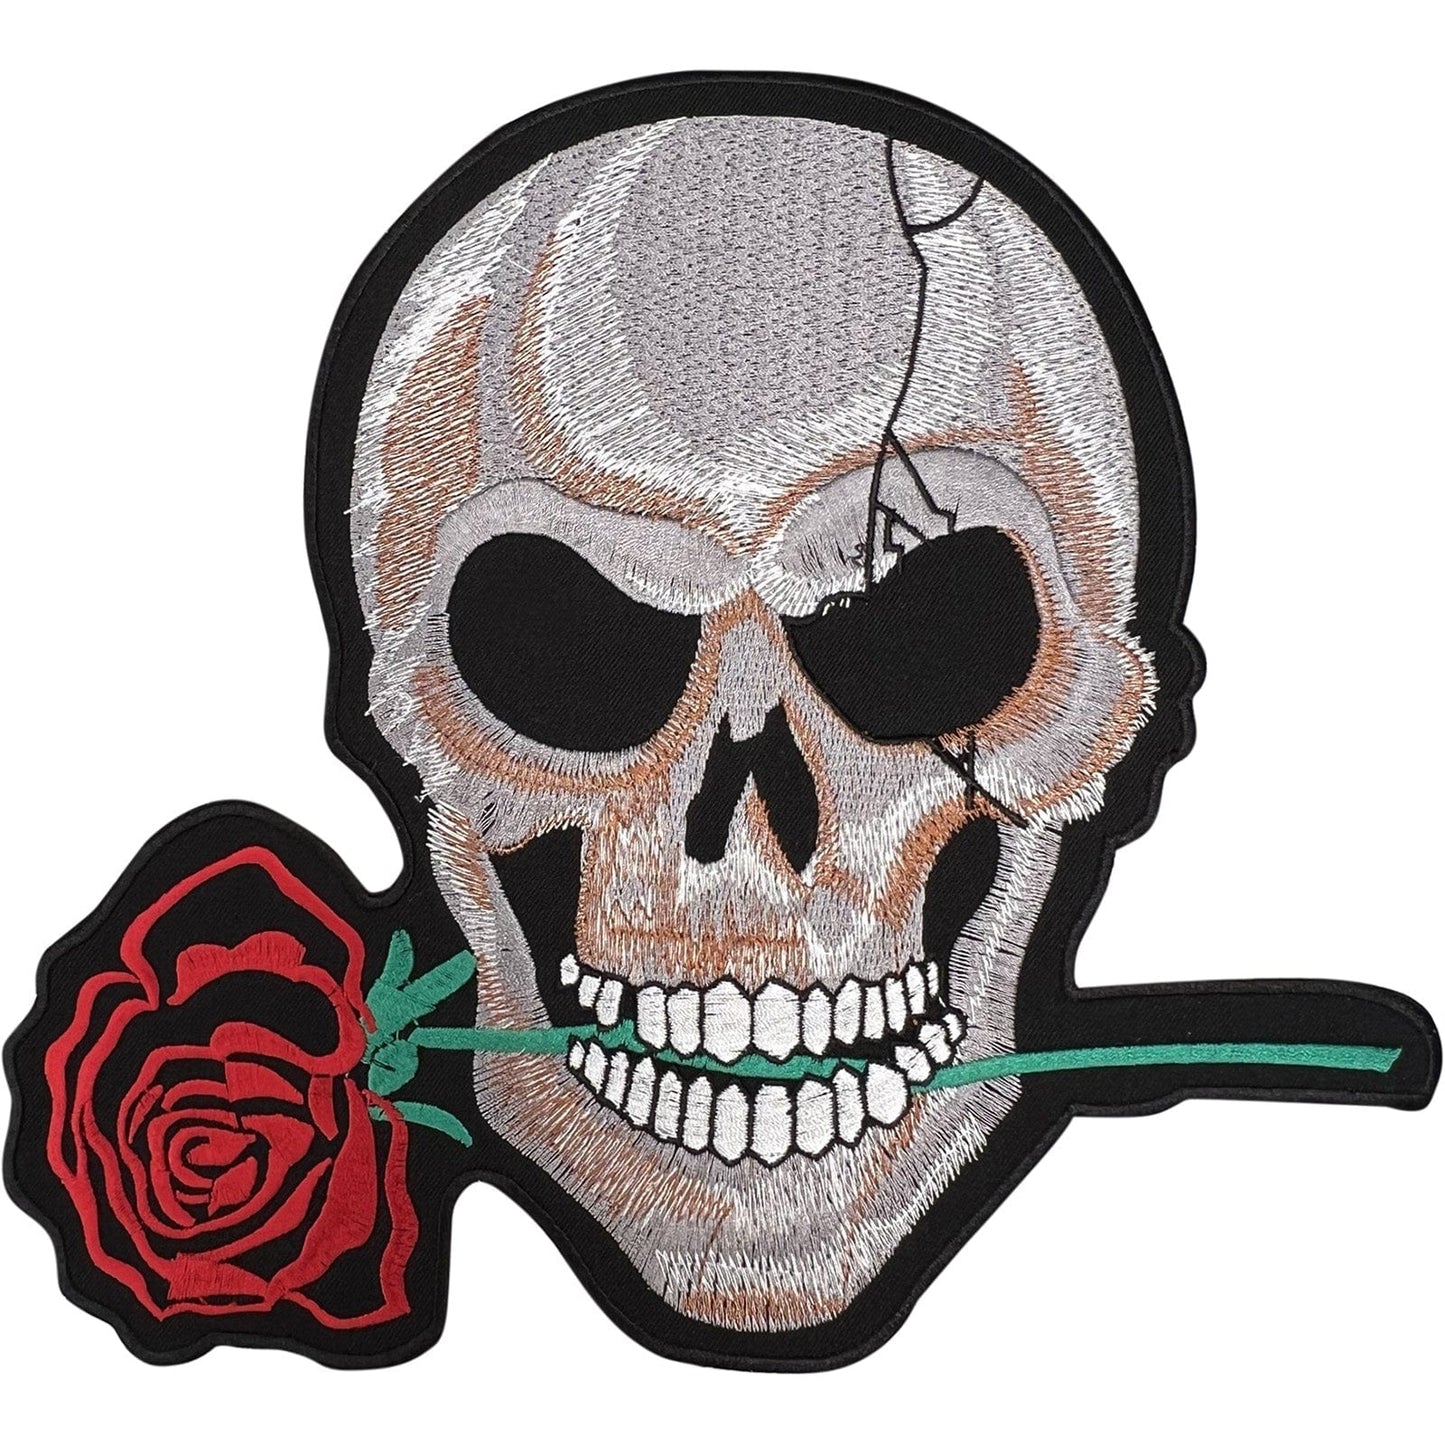 Big Skull Red Rose Patch Iron Sew On Clothes Jacket Bag Large Embroidered Badge